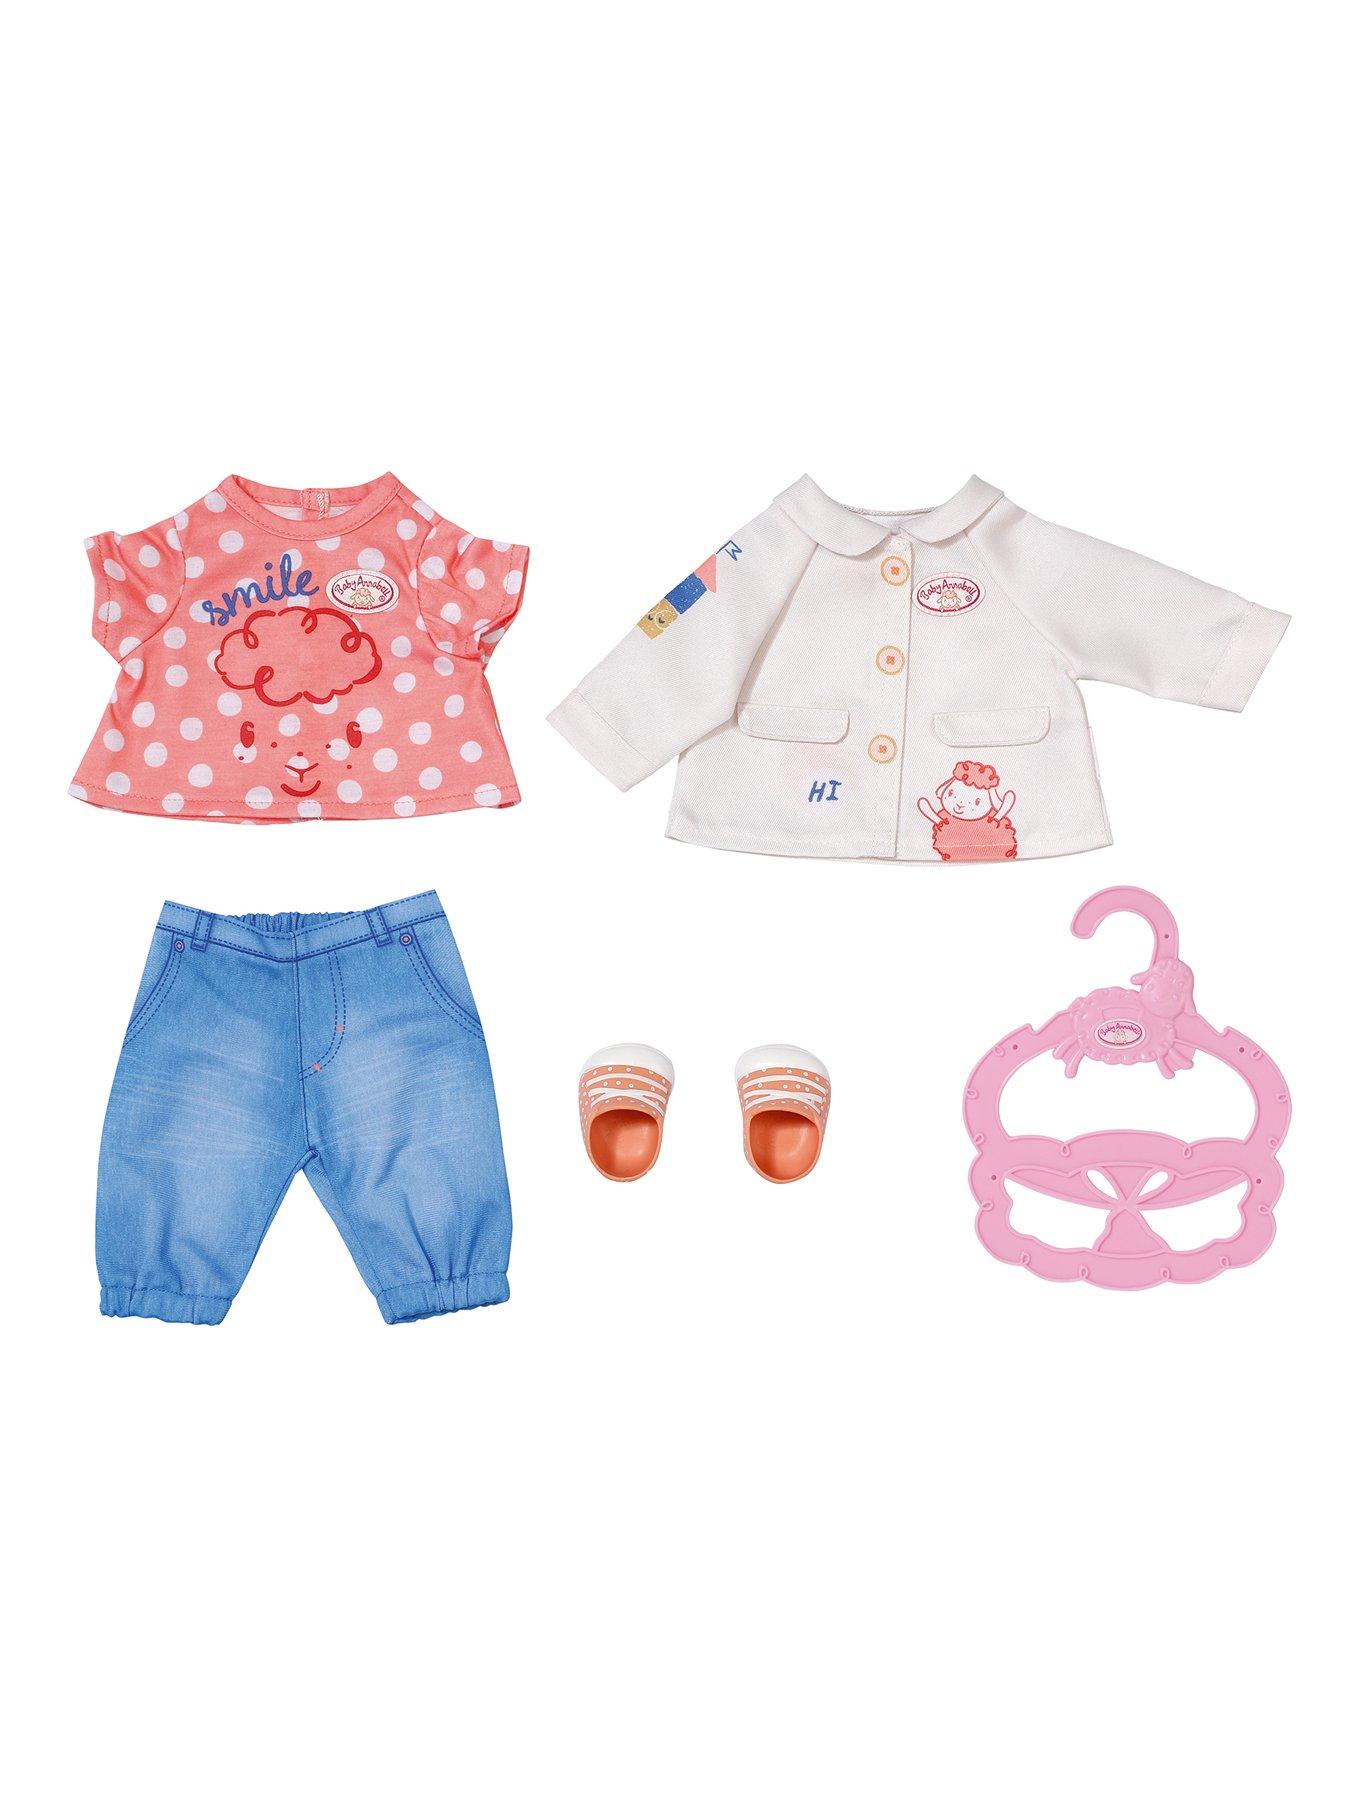 Baby outfits & accessories | Toys | Very Ireland